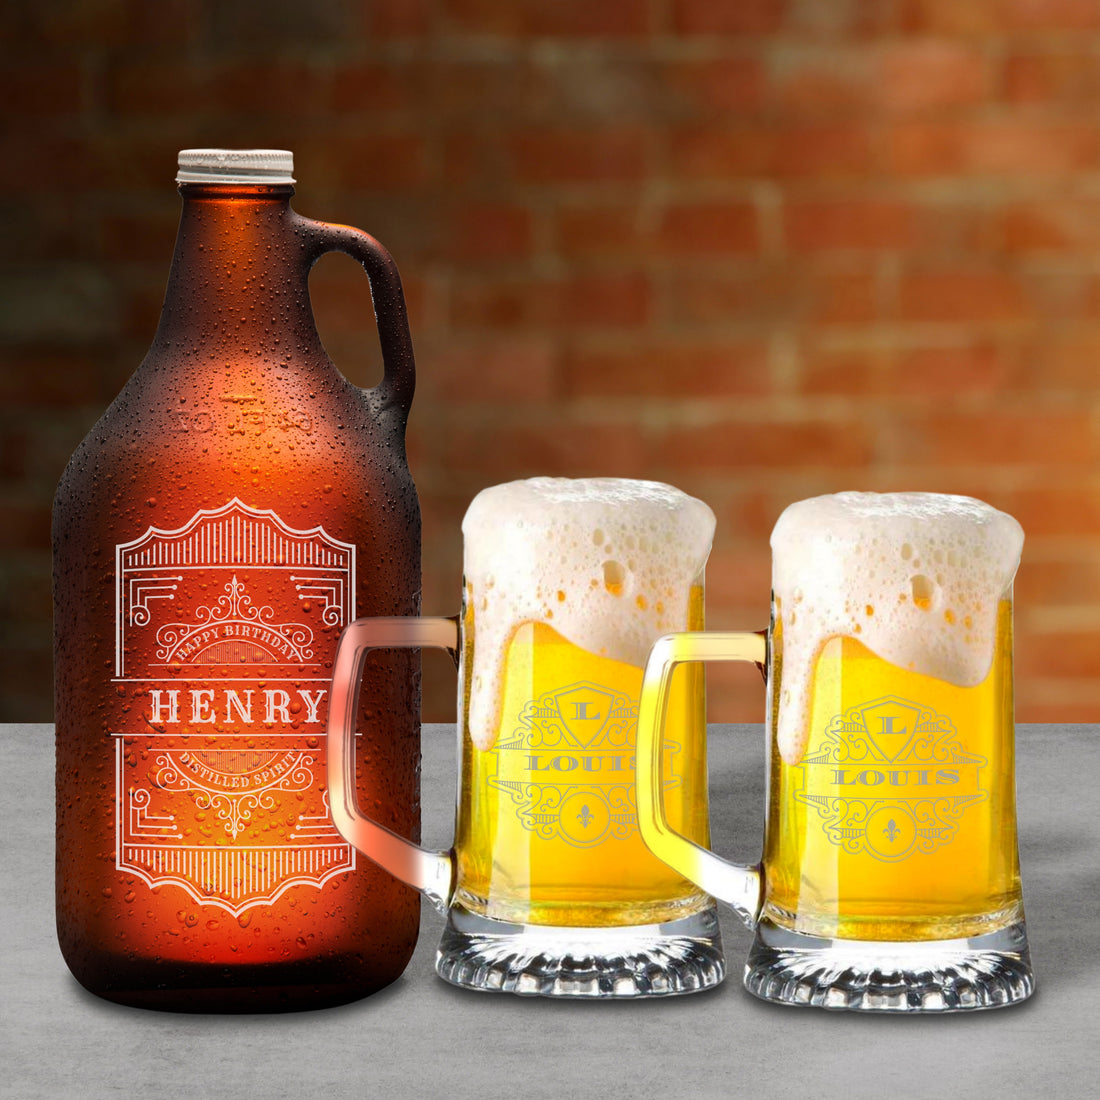 Personalised 1.9L Amber Glass Craft Beer Growler & 2 Italian Tankard Mugs, Engraved Brewery Bottle & Glasses, Etched Custom Logo Corporate/ Father/ Housewarming Gift, Wedding/ Groomsmen Favour